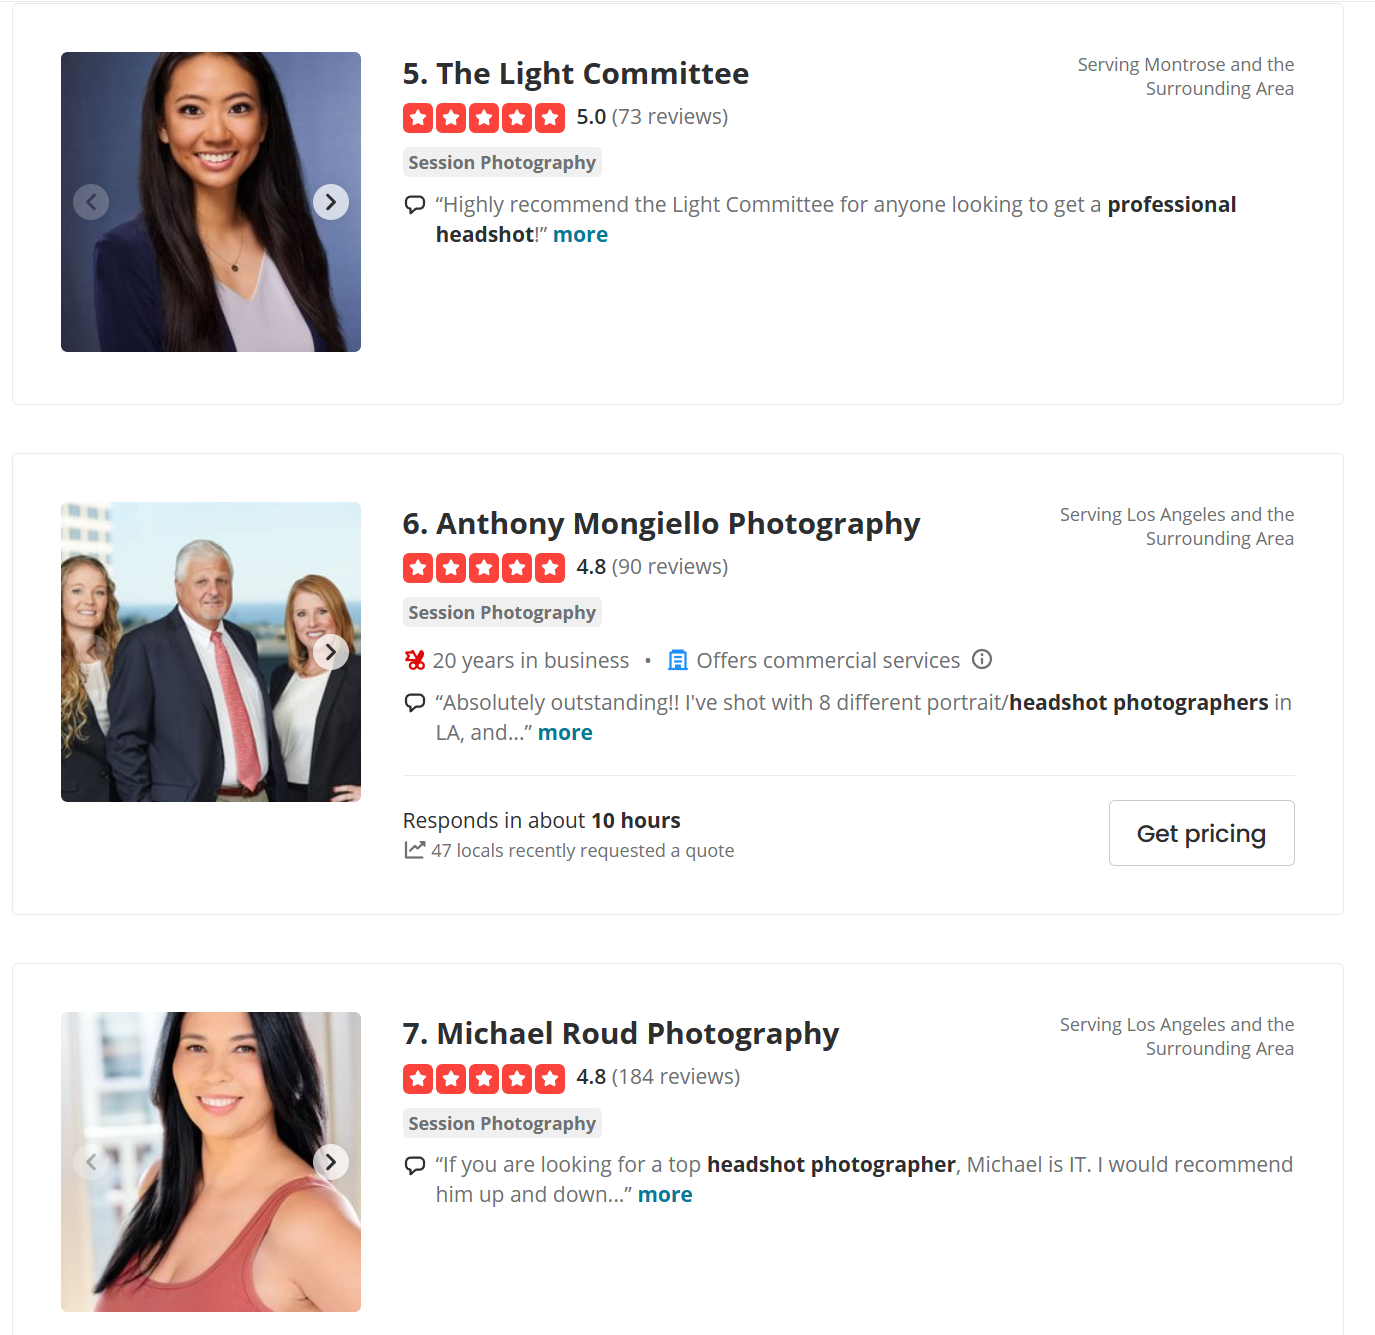 Yelp Lists The Light Committee Top Headshots in Los Angeles